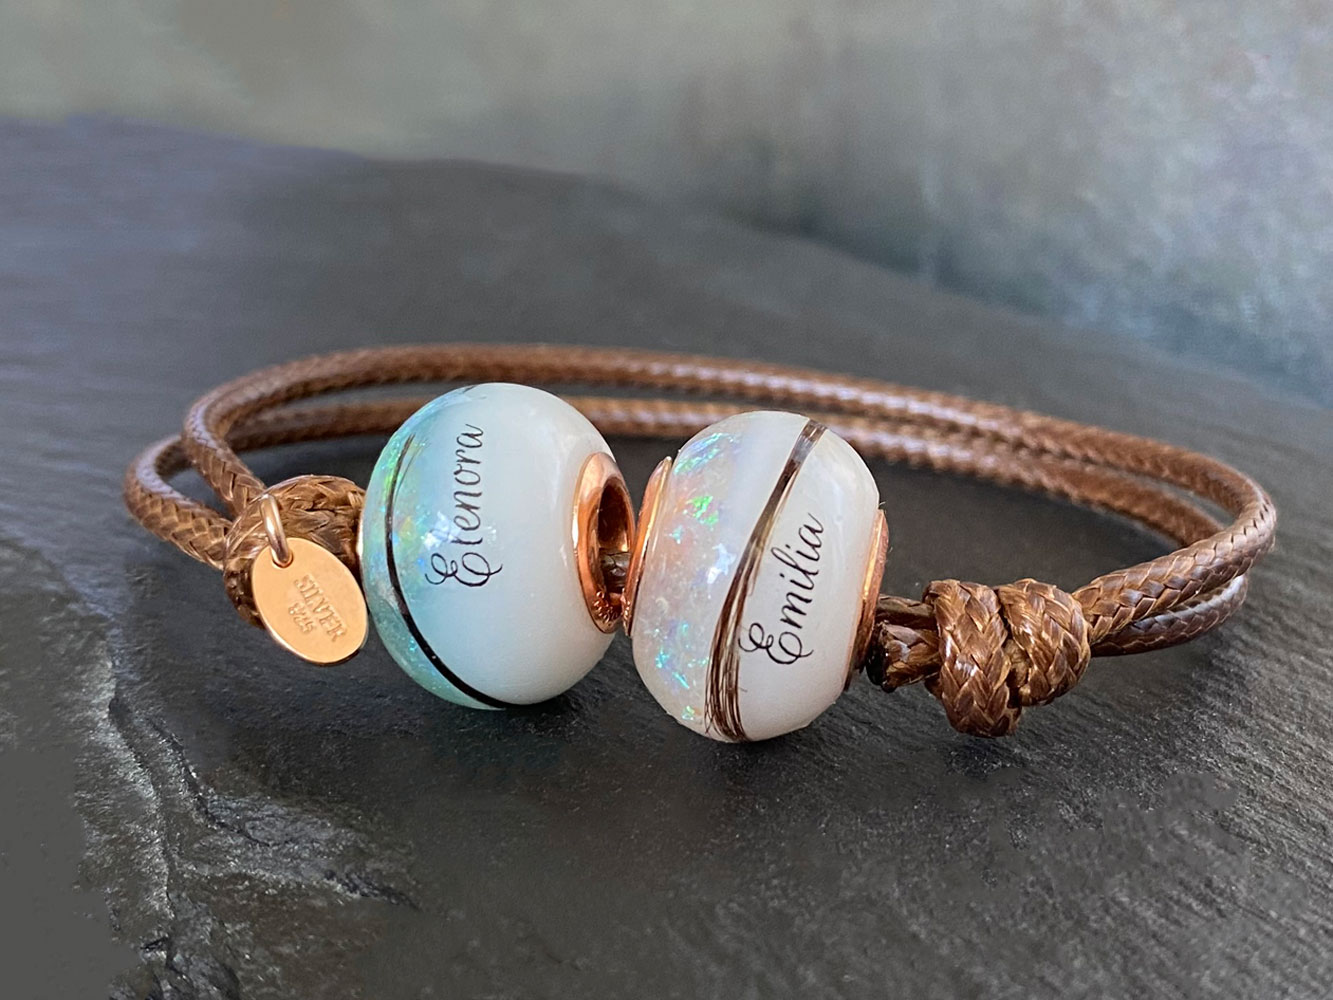 breastmilk jewelry bead bracelet with birth color childs name birth date rosegold hair inclusion opal flakes keepsakemom